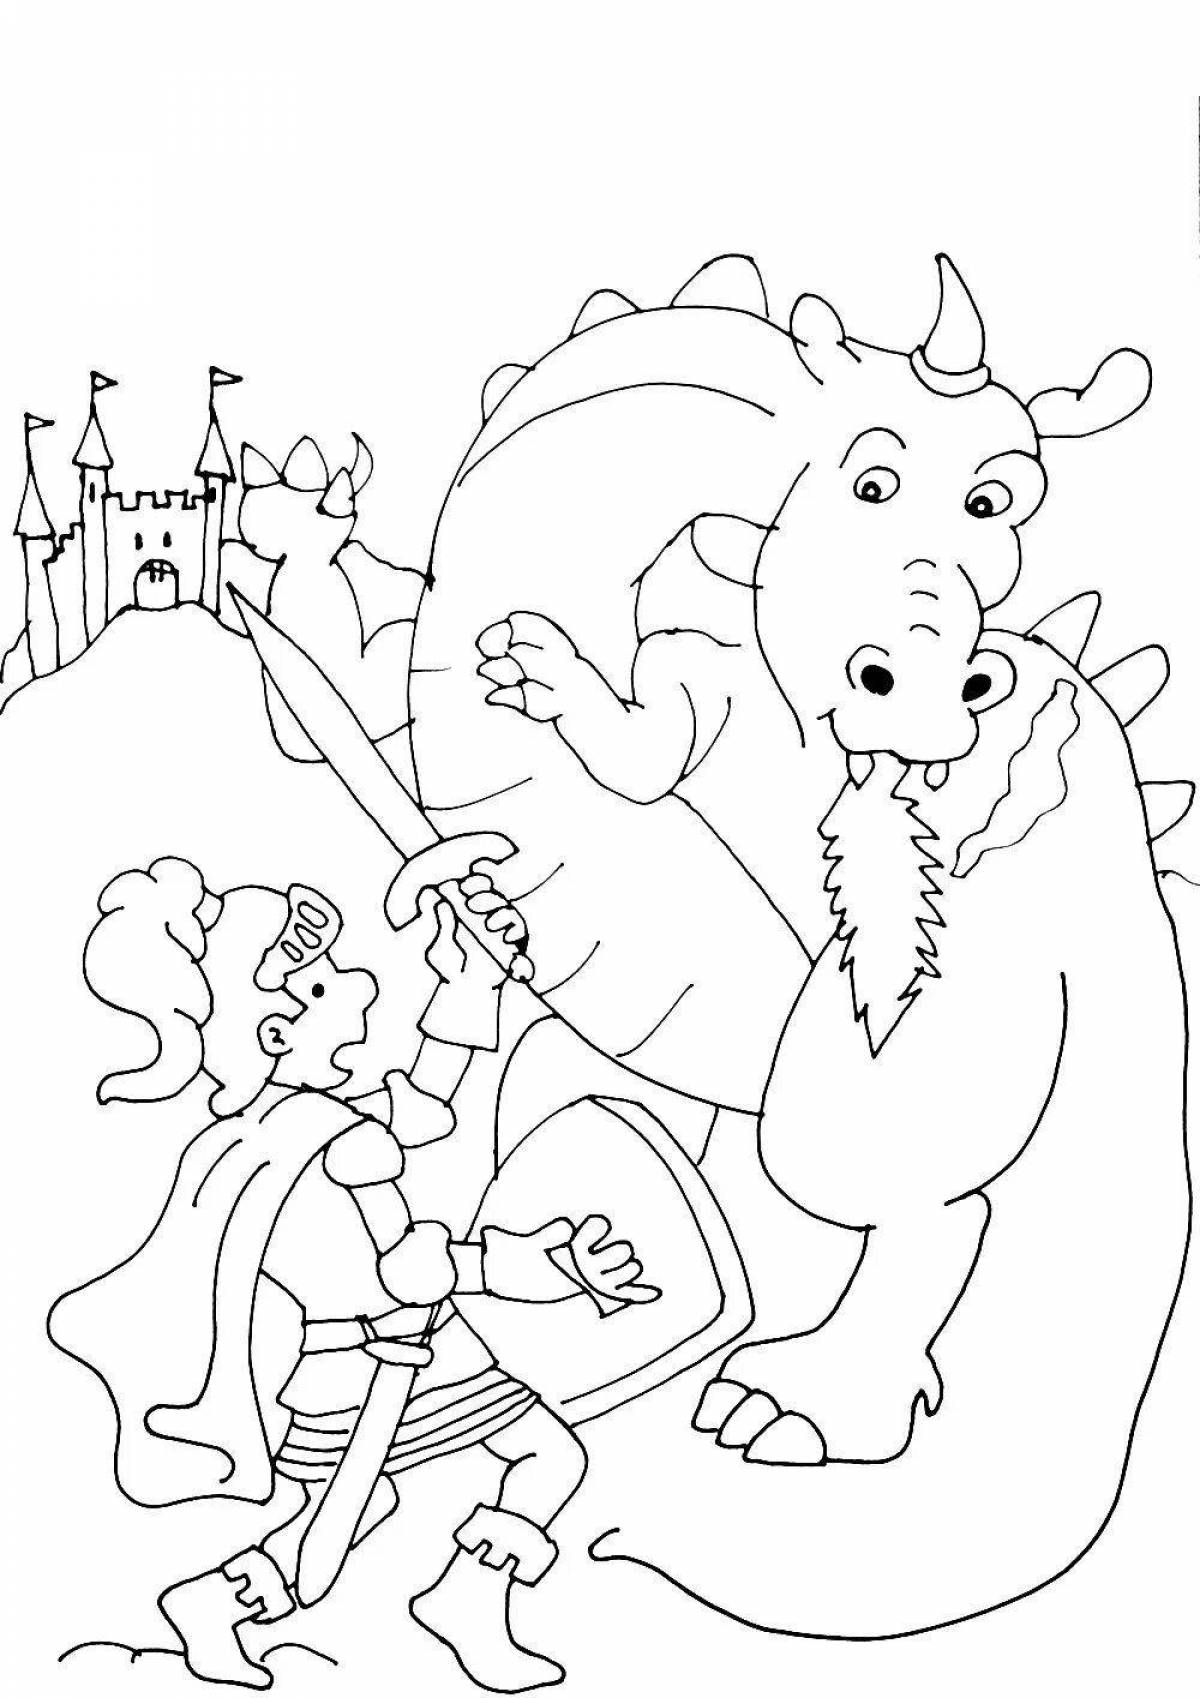 Radiant coloring page princess knight and dragon